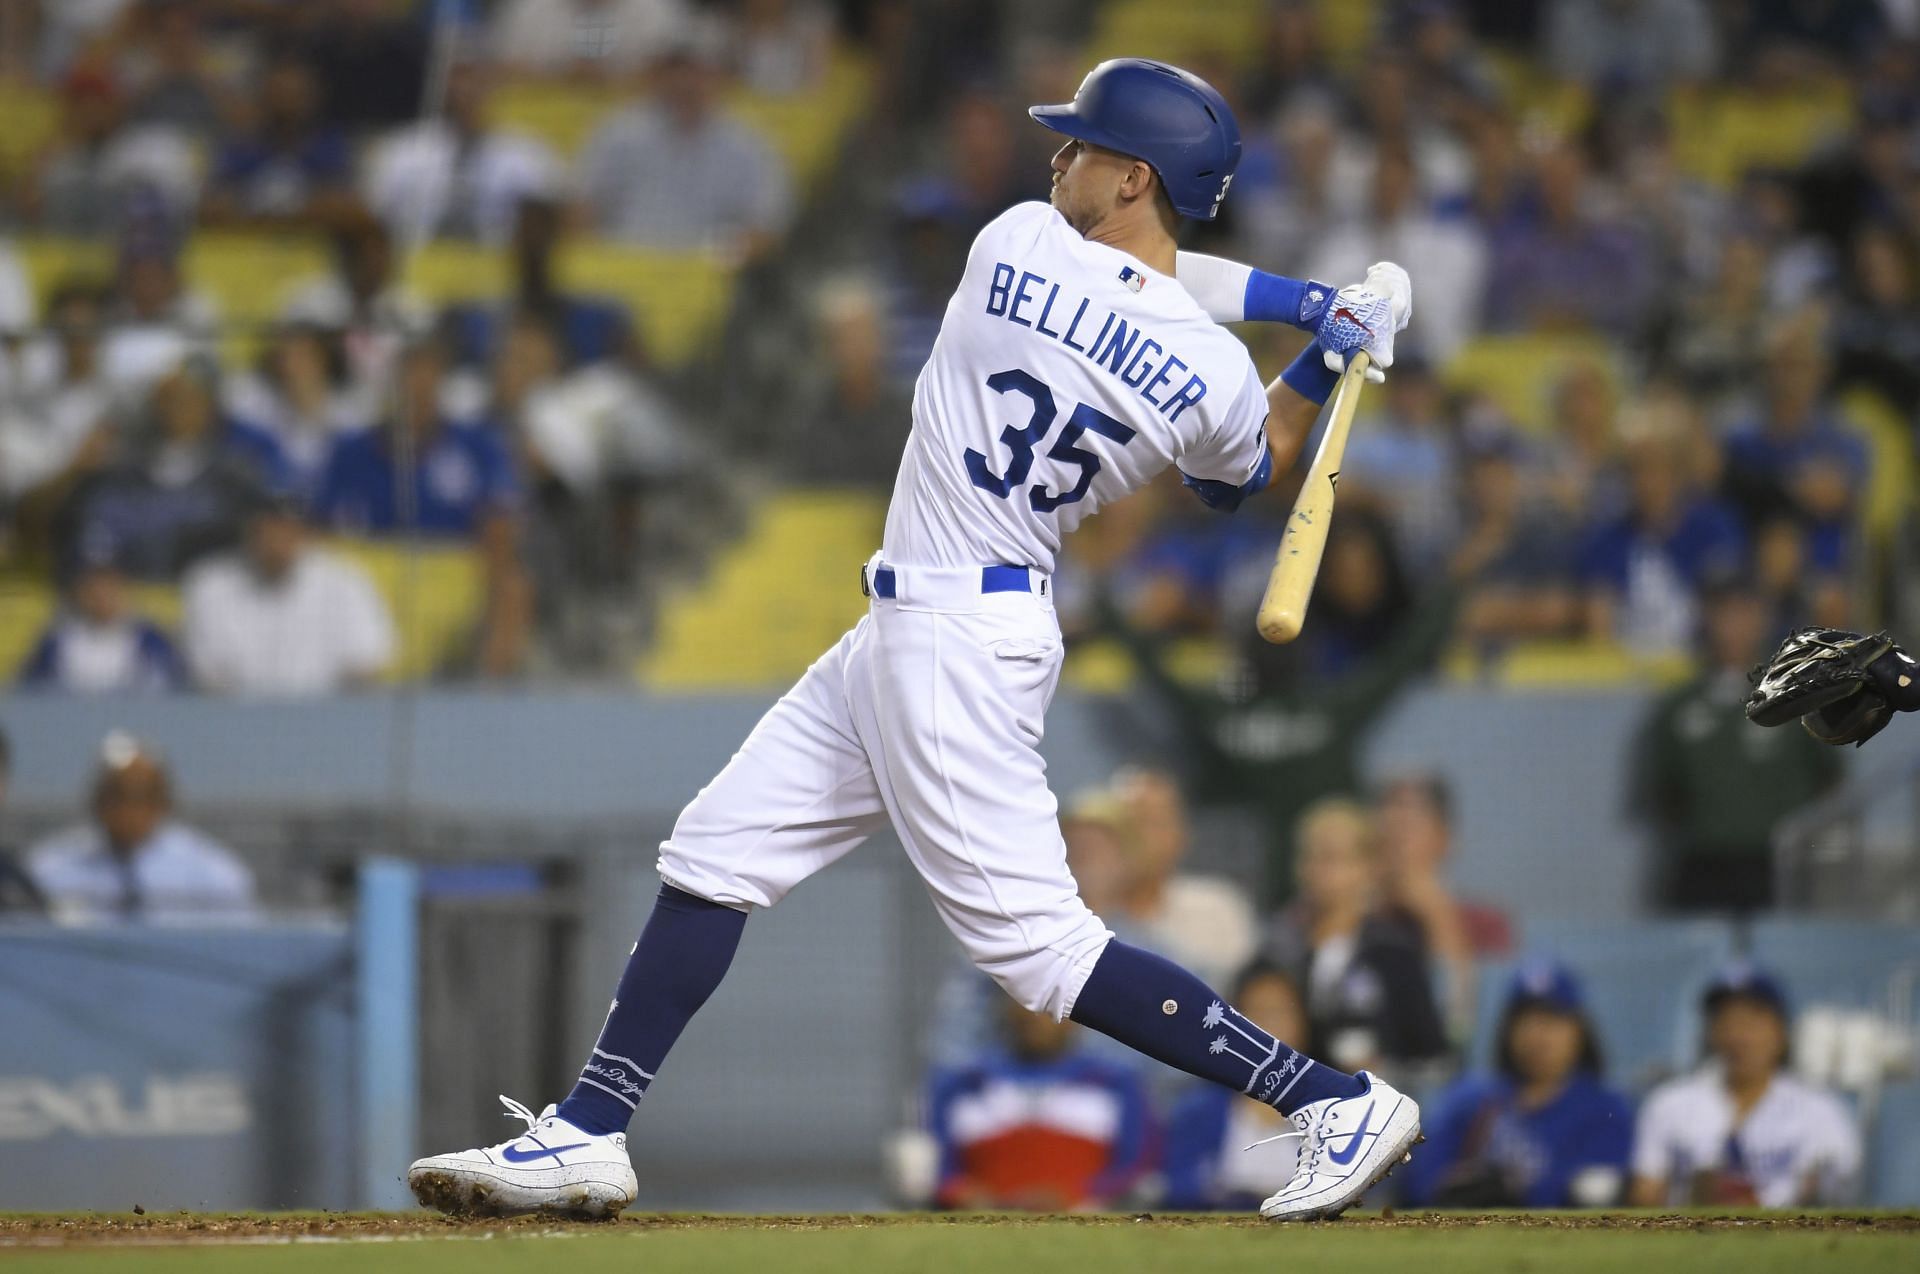 The Blue Jays have reportedly reached out to free agent Cody